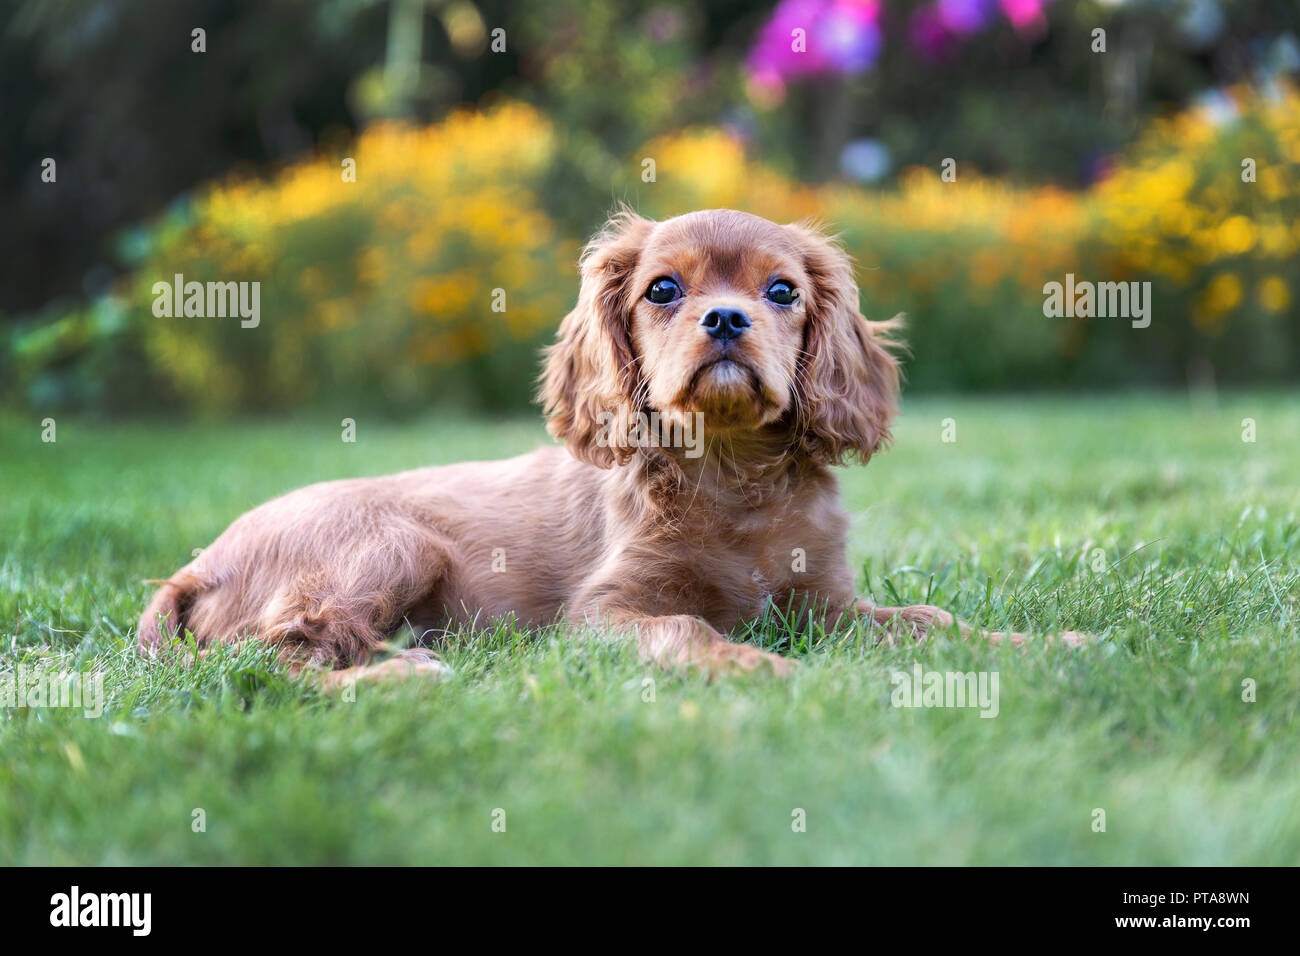 Adorable puppy lying on the green grass in the garden Stock Photo